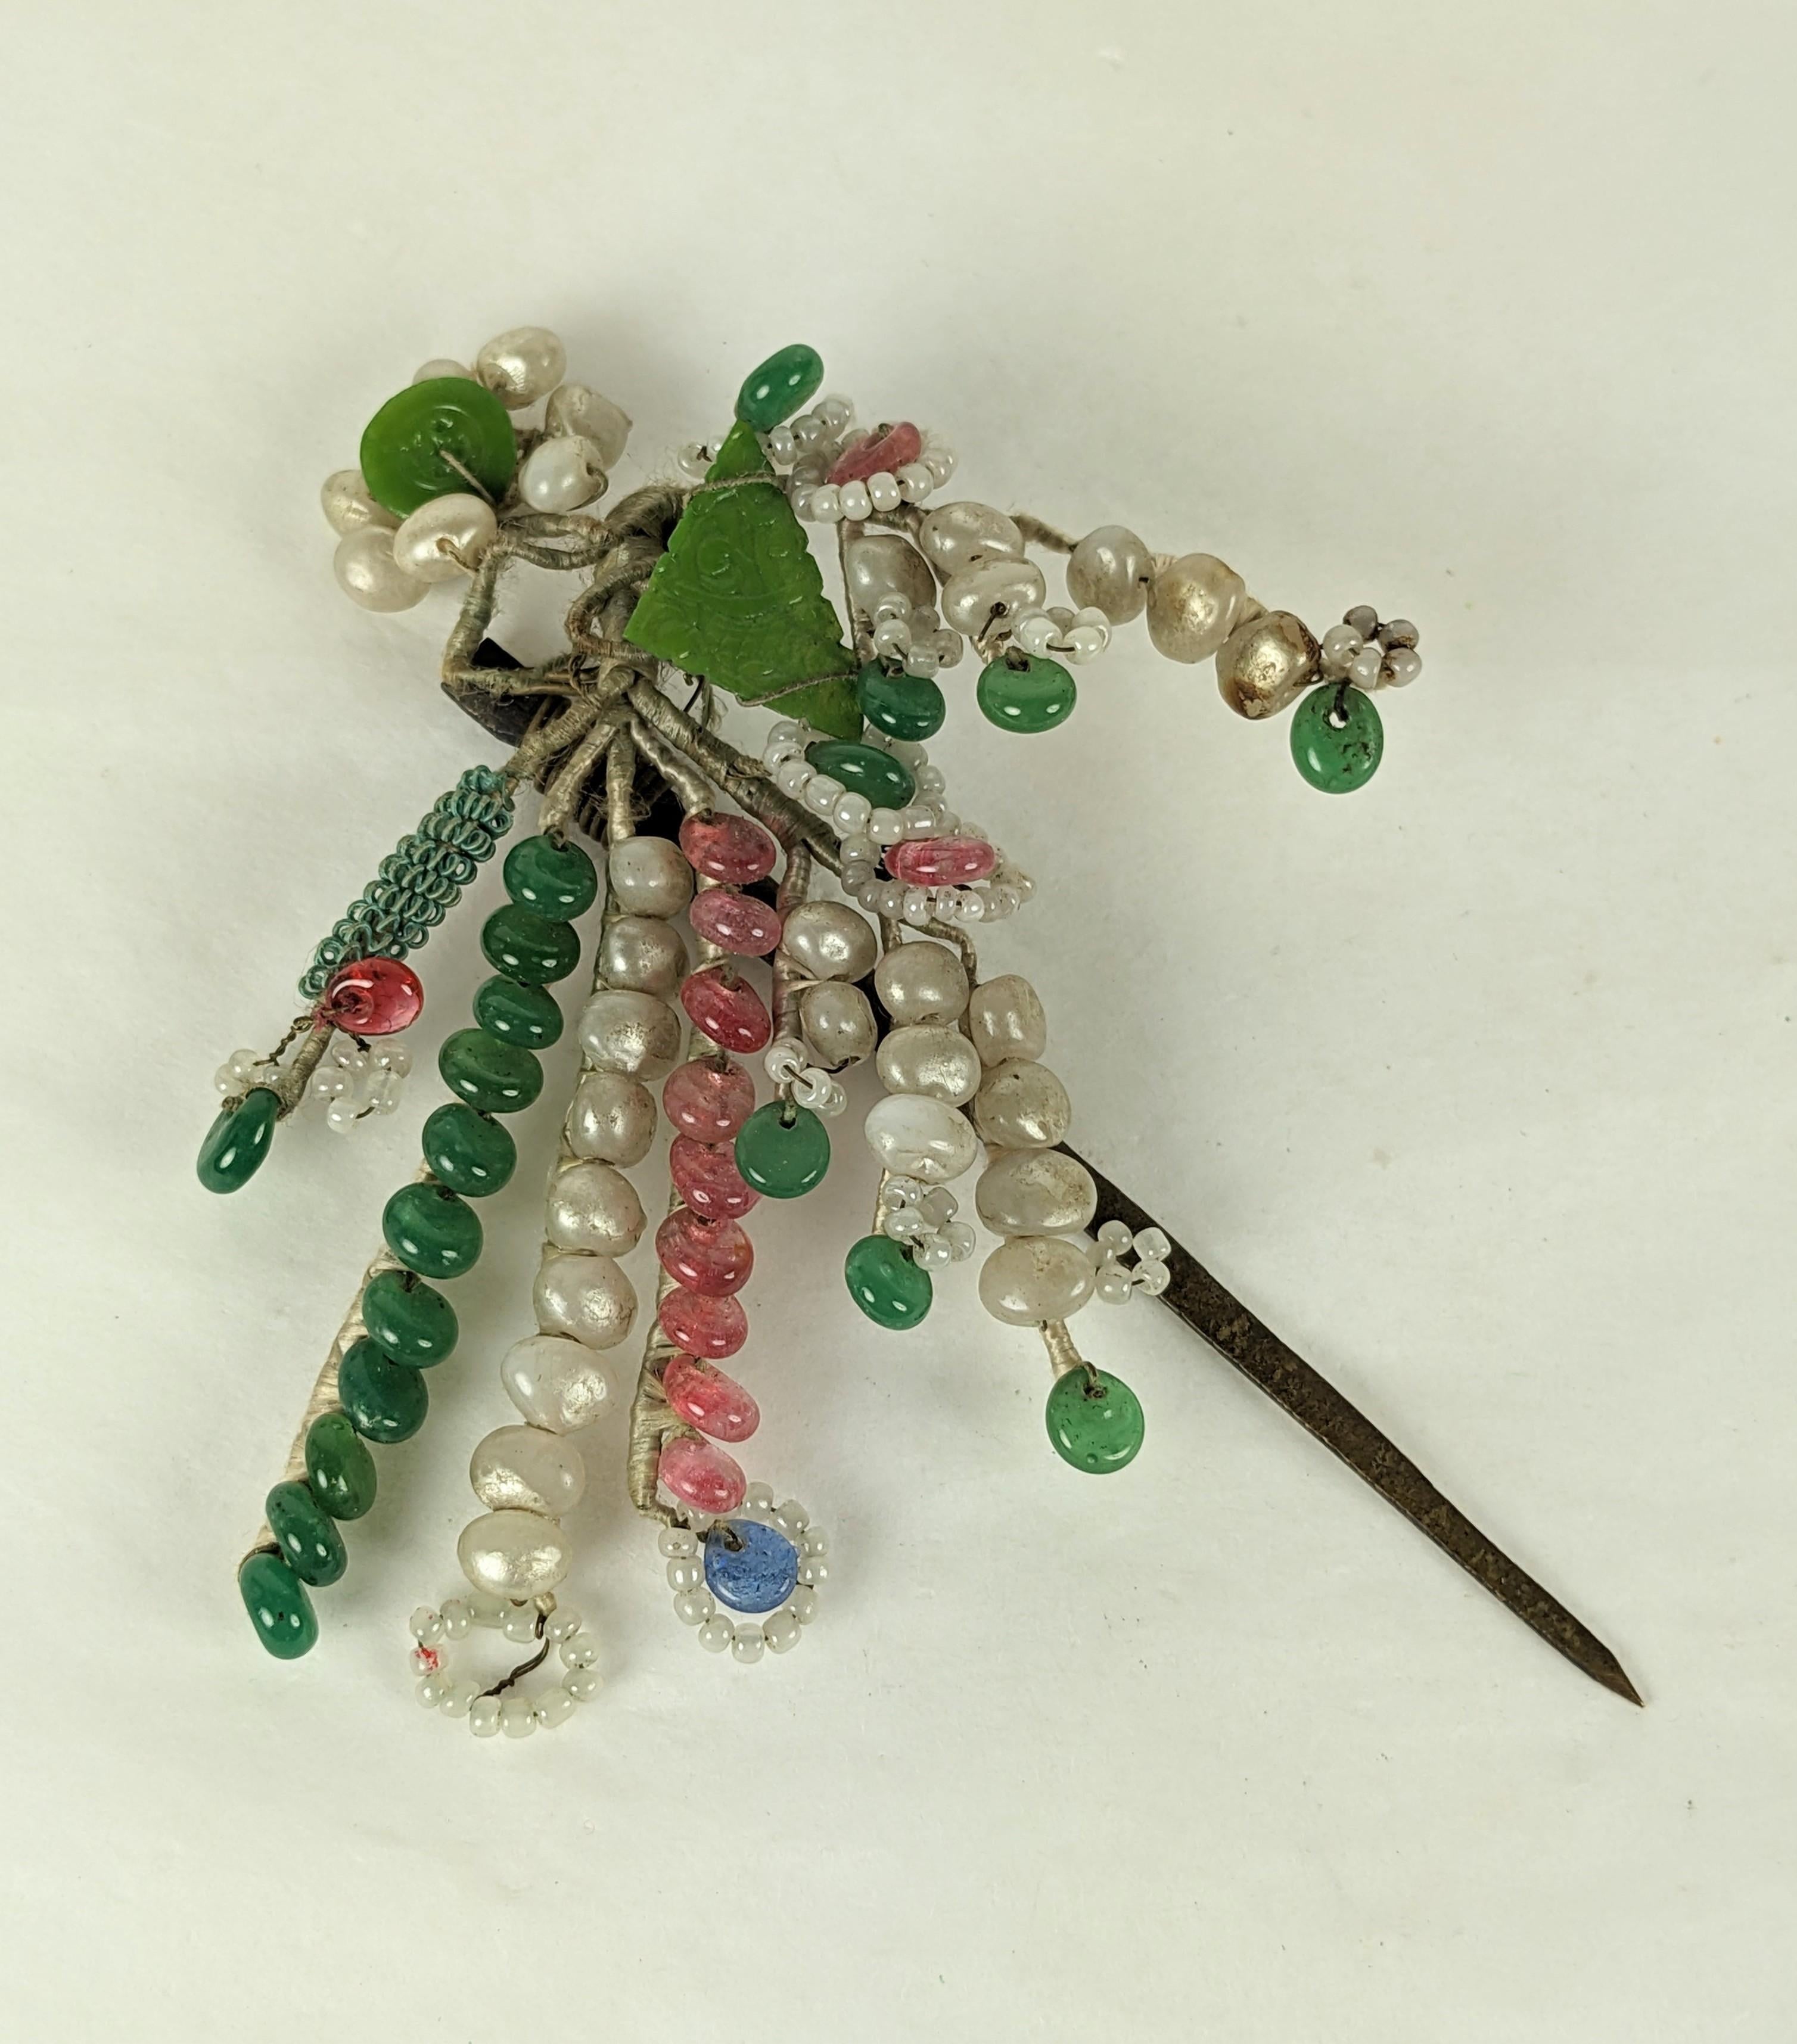 Antique Chinese Jeweled Tremblant Hair Pick from the Art Deco period. Made with faux pearls and molded glass to replicate gems like jade and tourmalines. 4.5